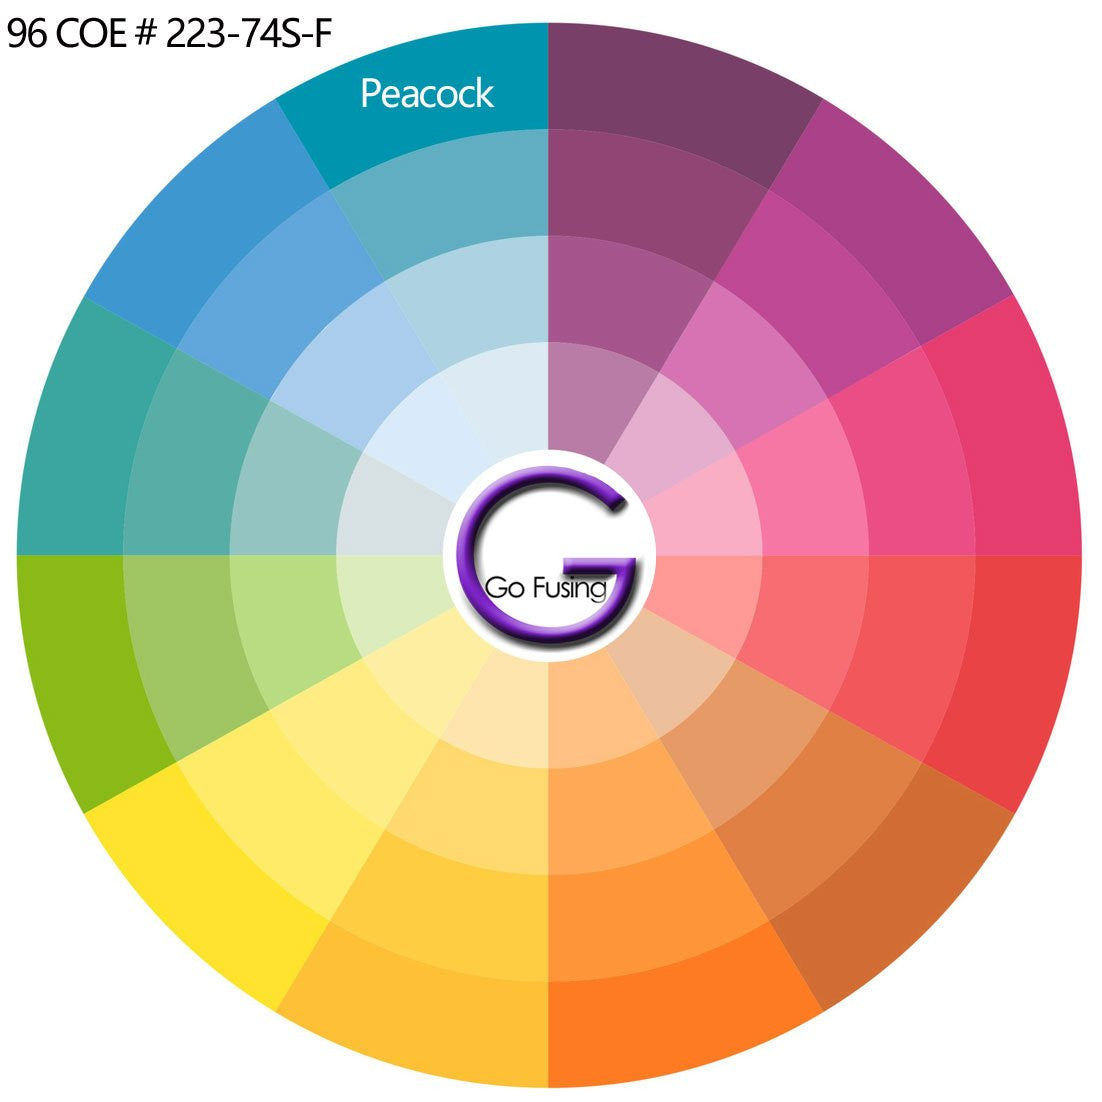 96 COE Color Wheel displaying fusible Sheet Glass Peacock Blue Green Compatible or Contrasting Glass Colors